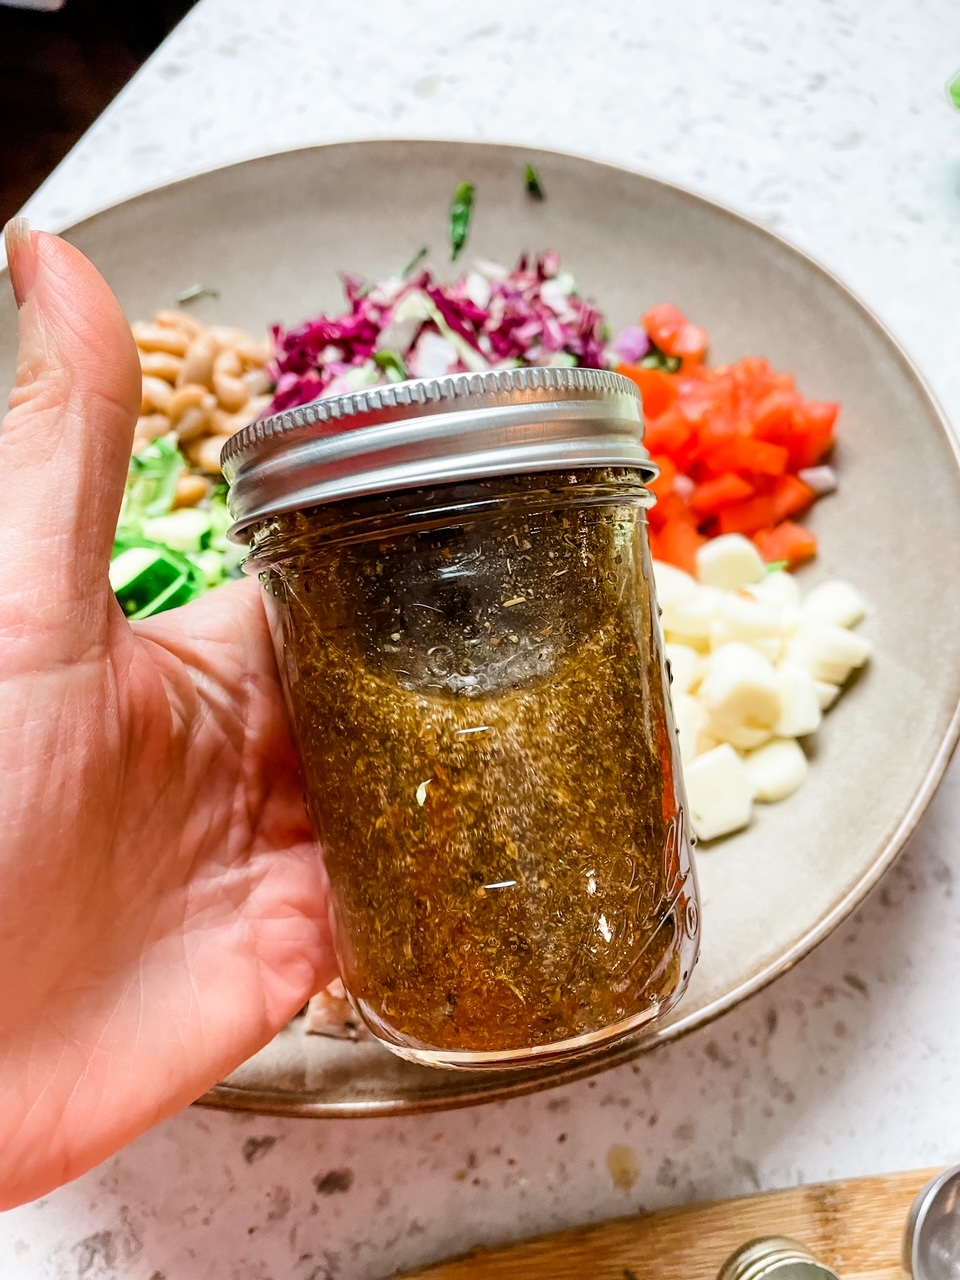 The homemade dressing in a bell jar